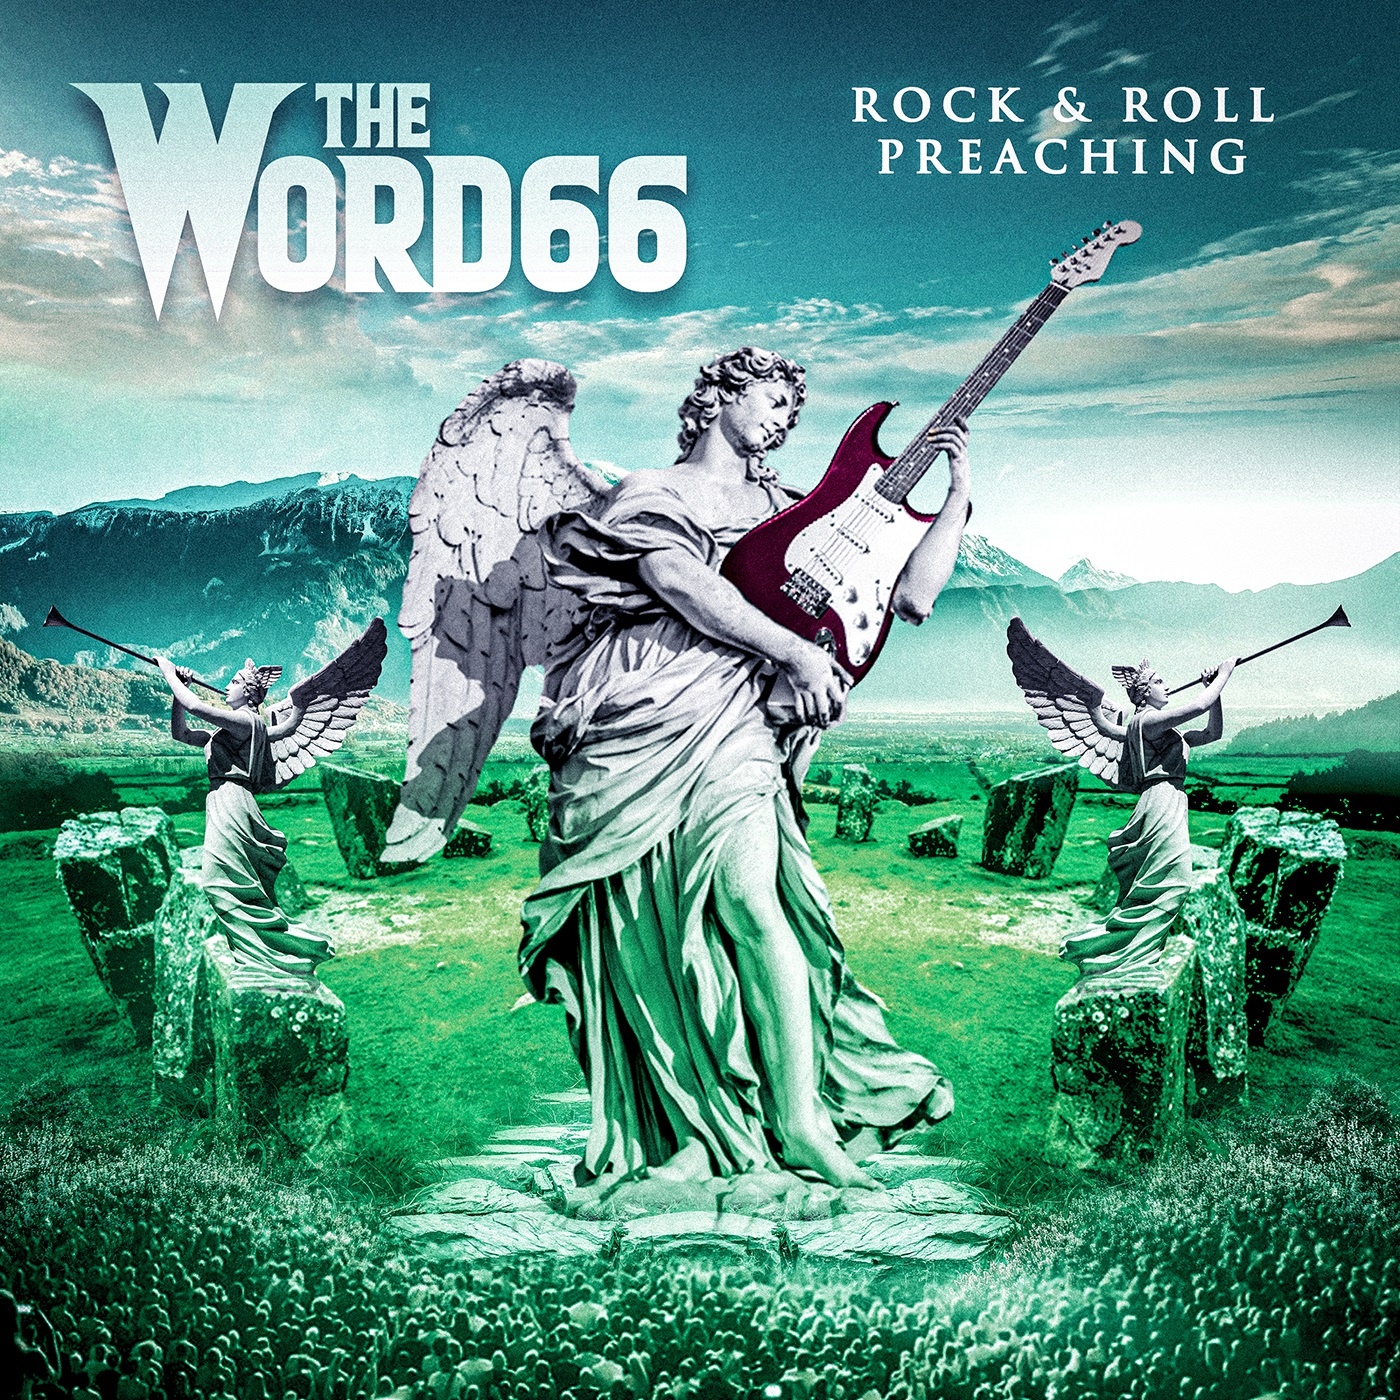 Listen To "Tonight Is The Night" By The Word66